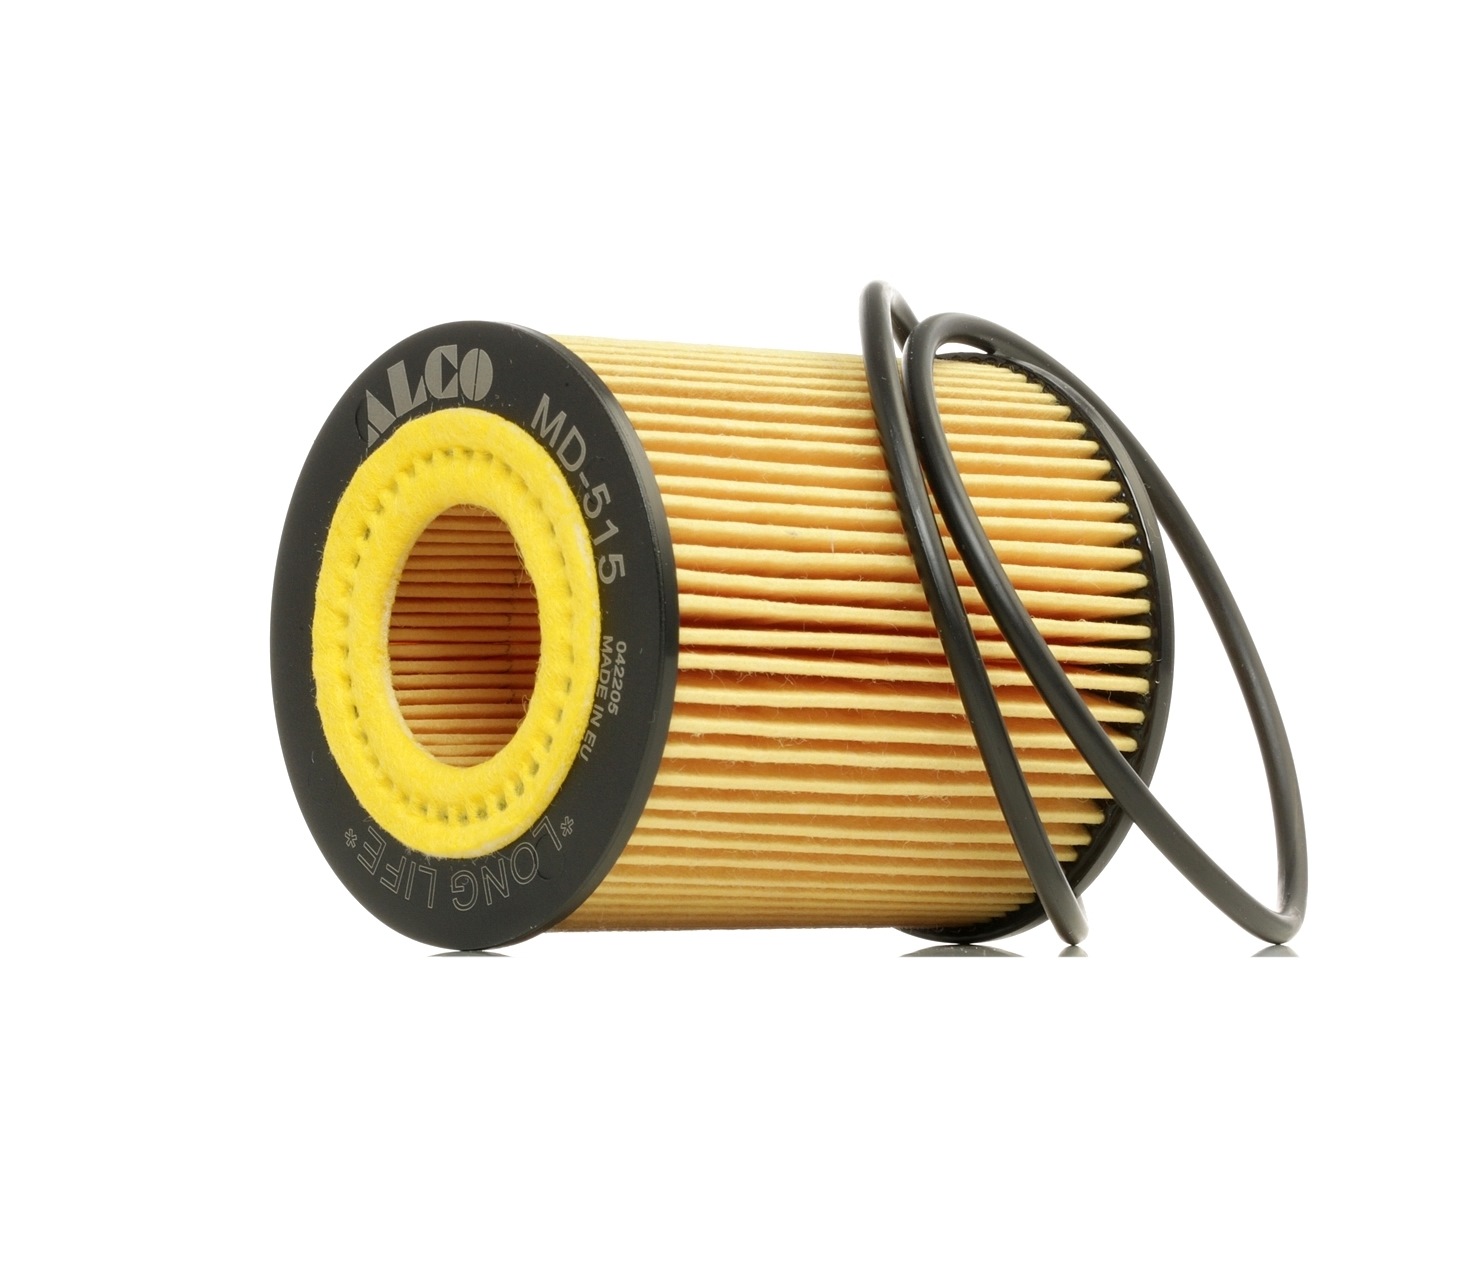 ALCO FILTER MD-515 Oil filter OPEL experience and price